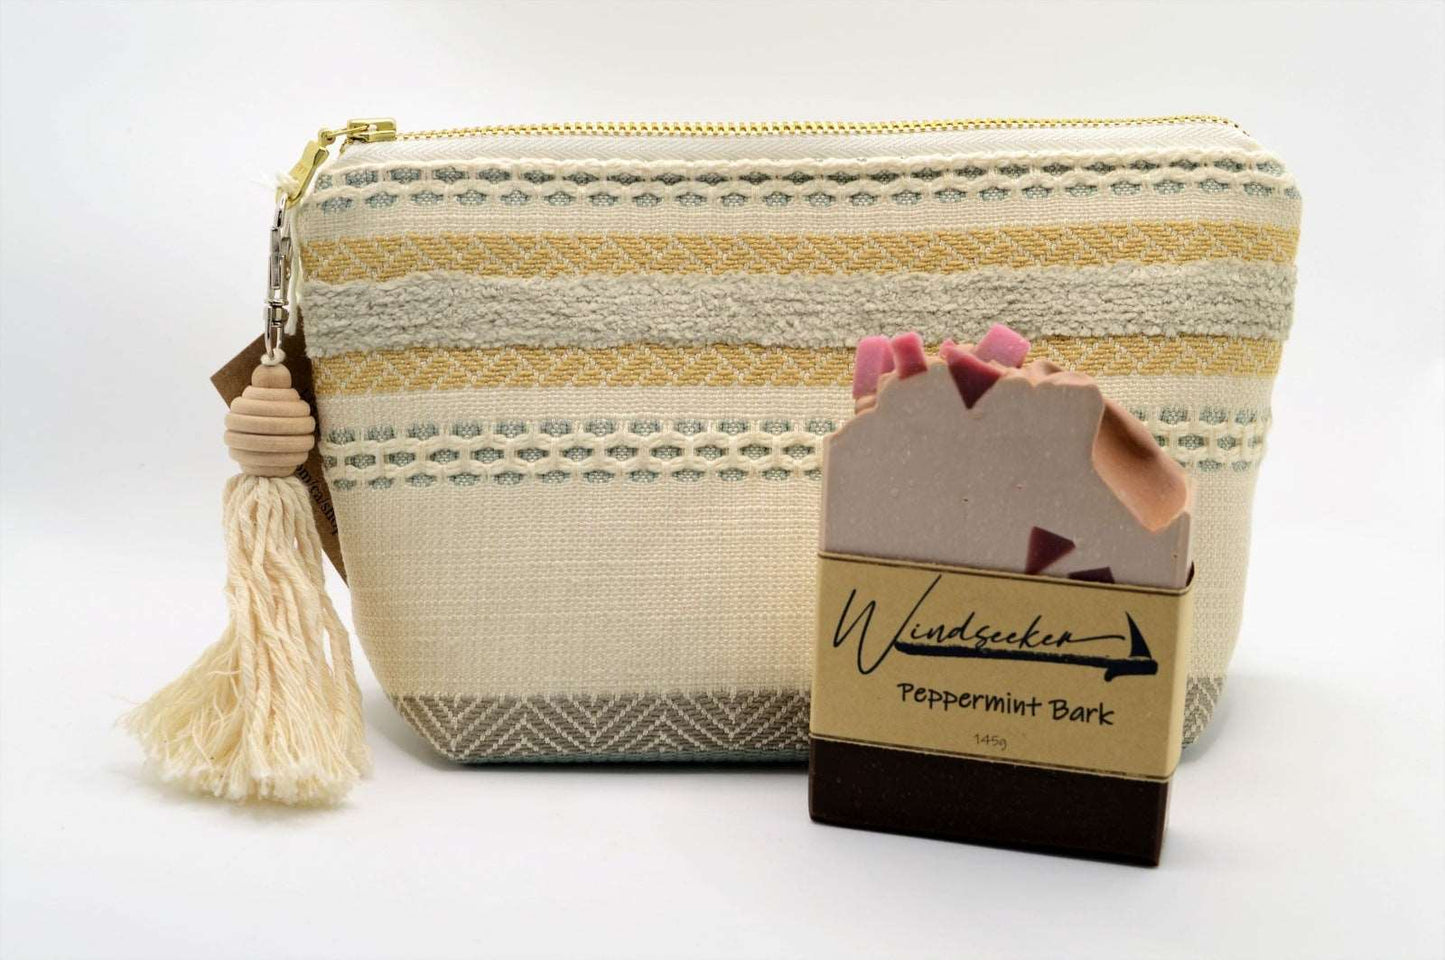 Cosmetic Bag with Pockets - Stripes GarKnit & Purl